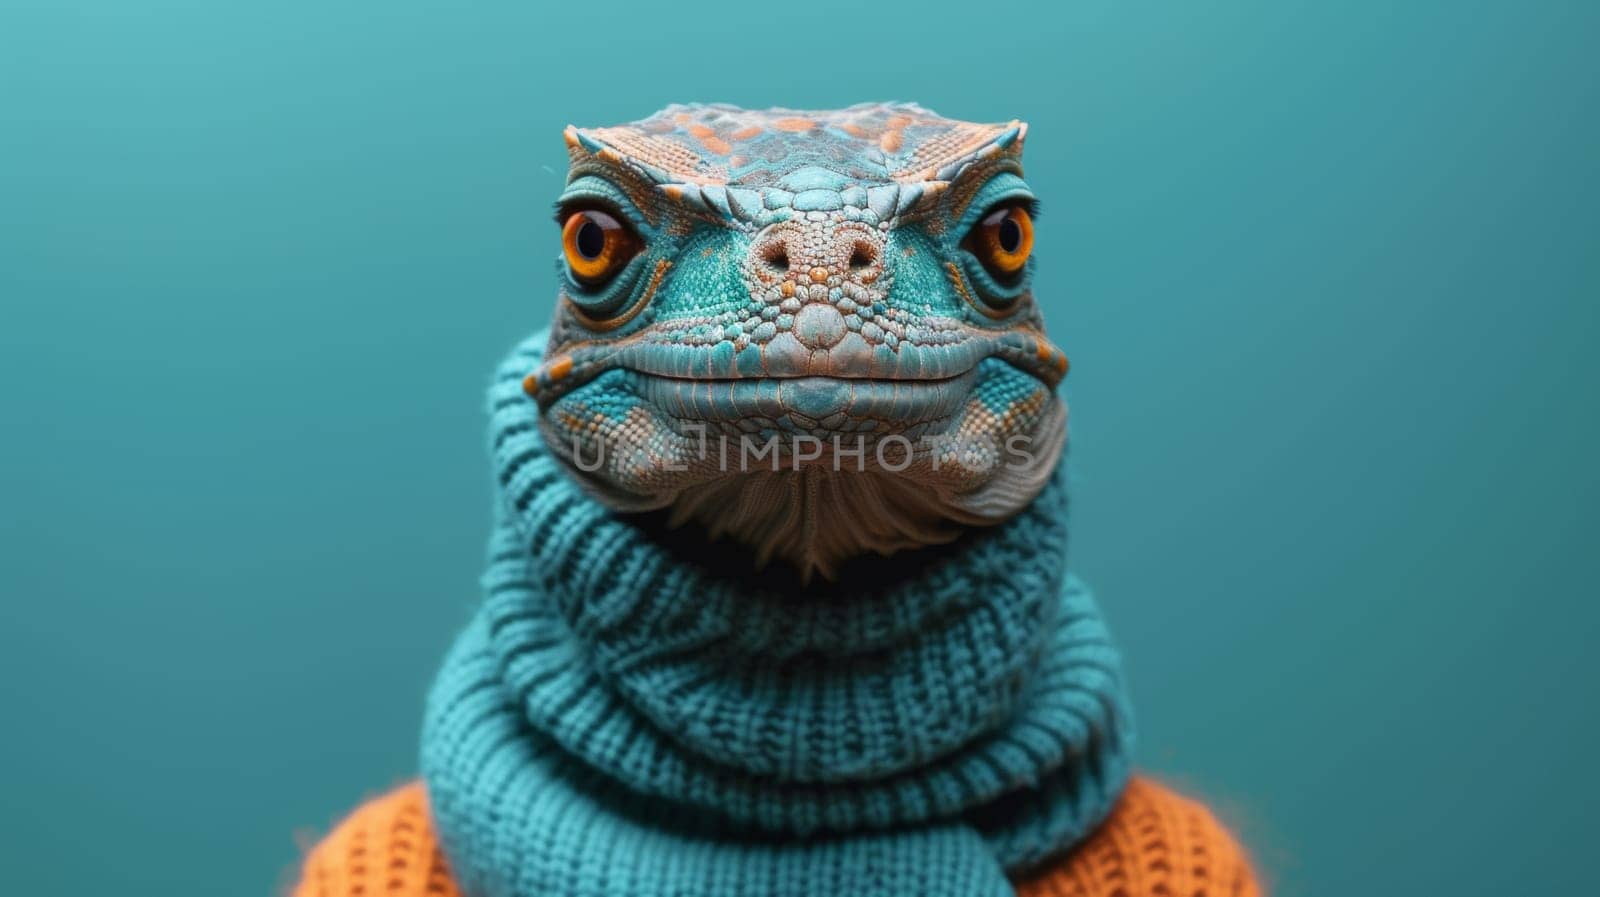 A lizard wearing a sweater and scarf with an orange face, AI by starush